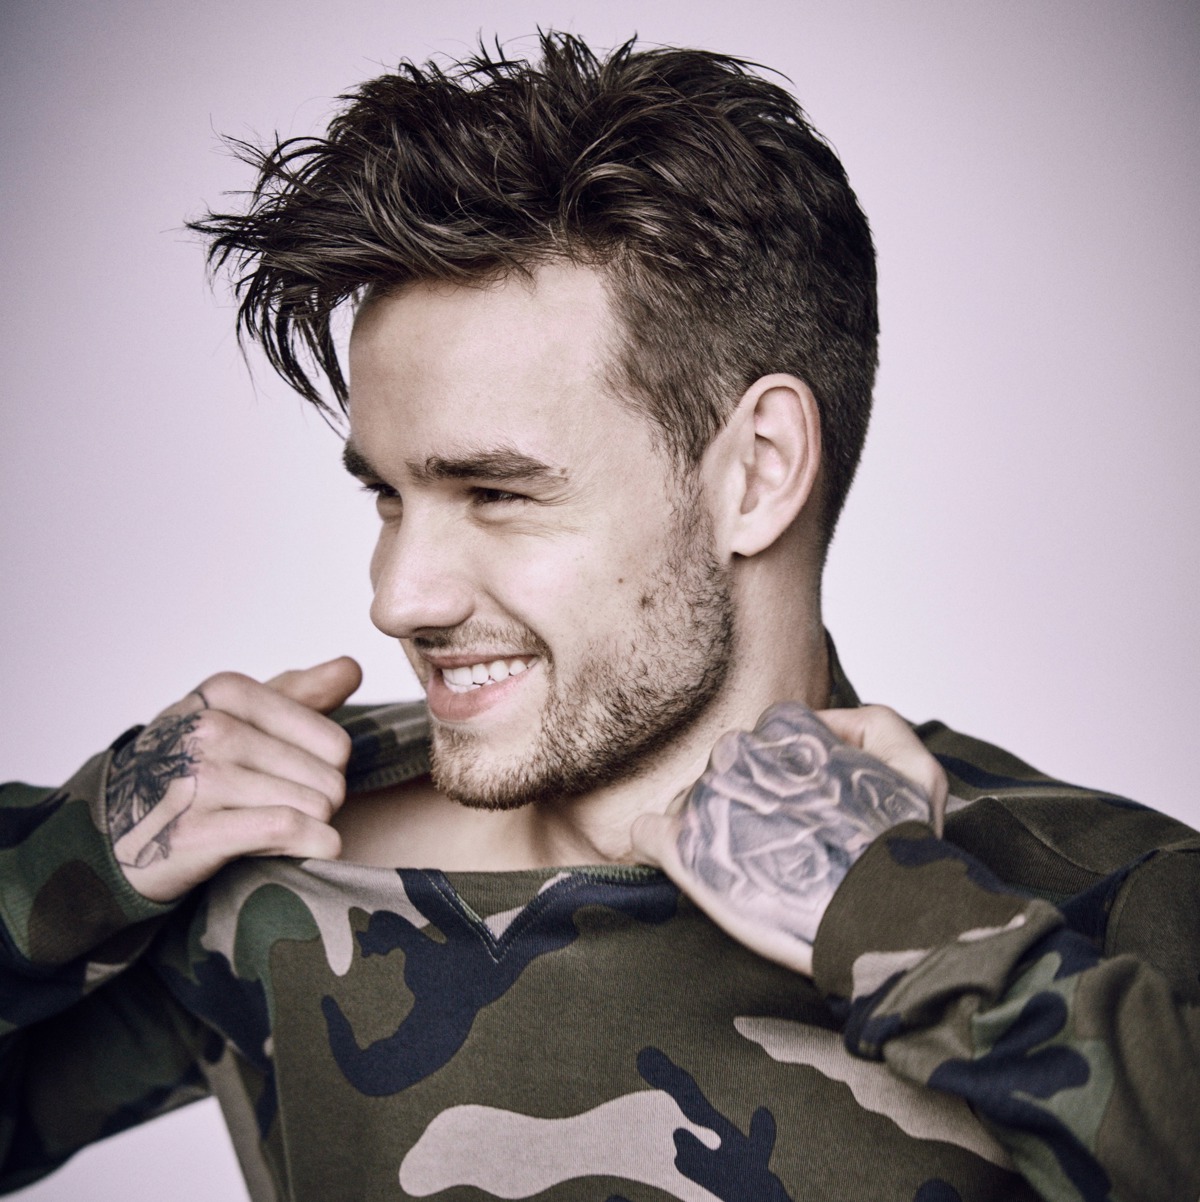 Liam Payne's debut single is now Platinum